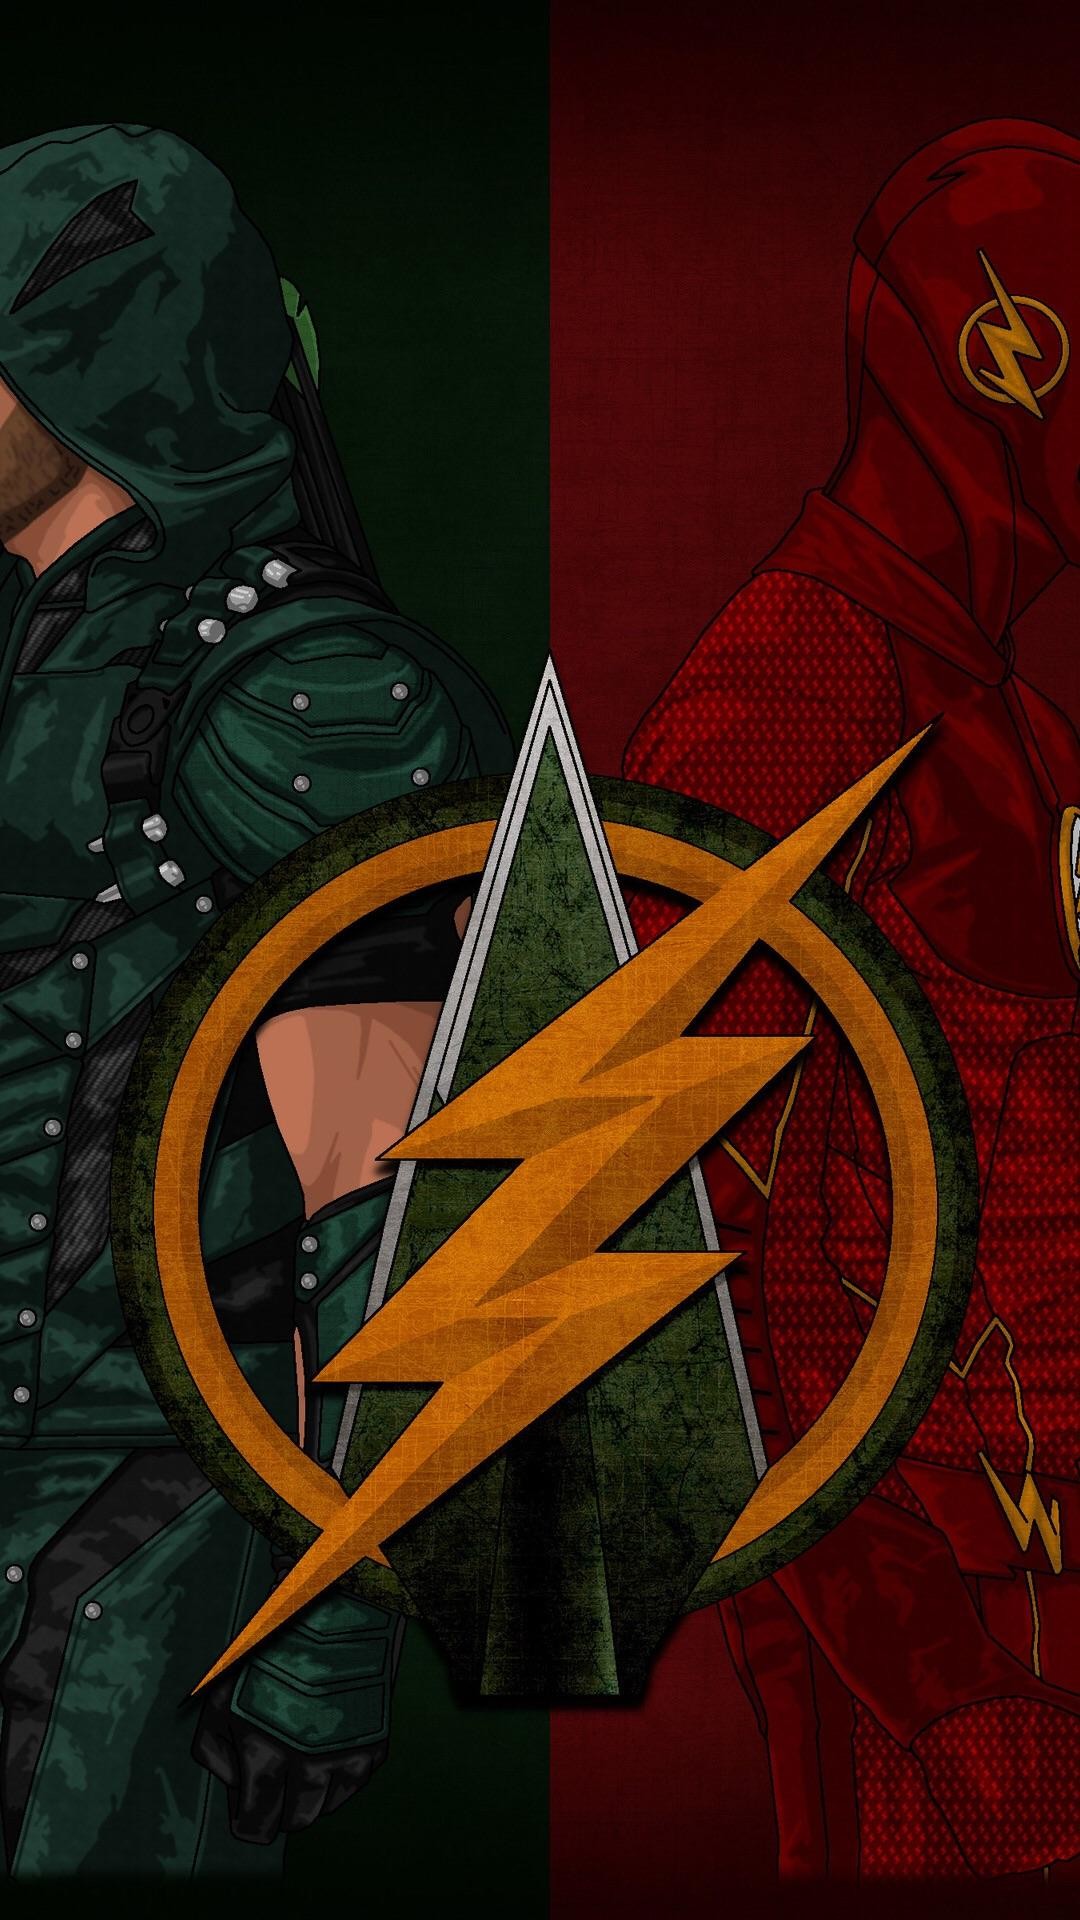 1080x1920 Off Topic[No Spoilers] A cool Flash/Arrow phone wallpaper I found ...